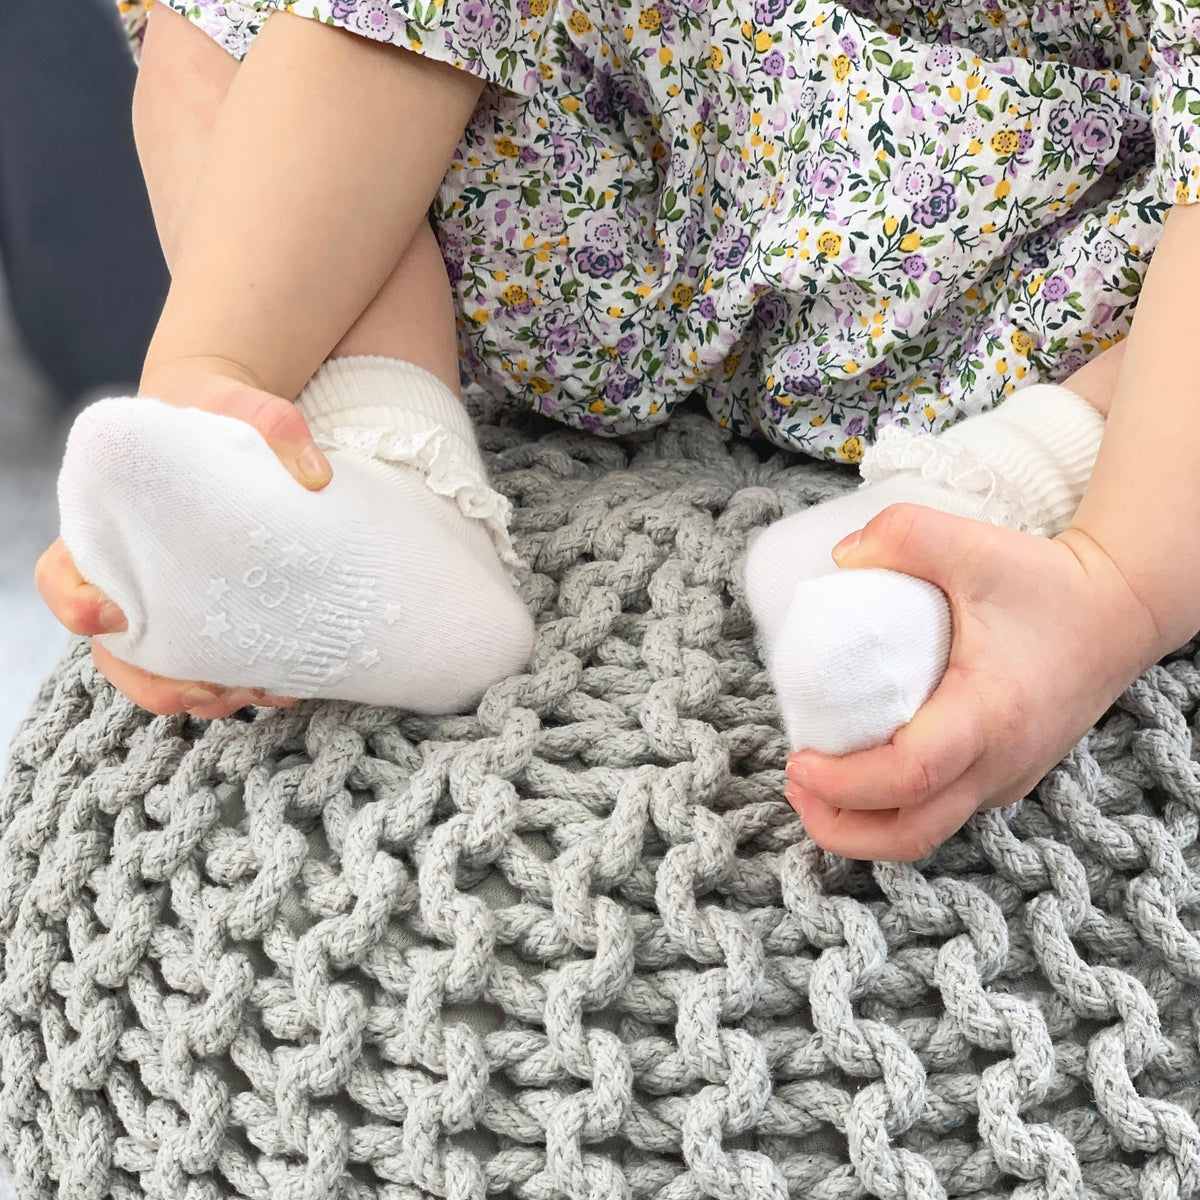 Frilly Non-Slip Stay-On Baby and Toddler Socks - 3 Pack in Plain Pearl White